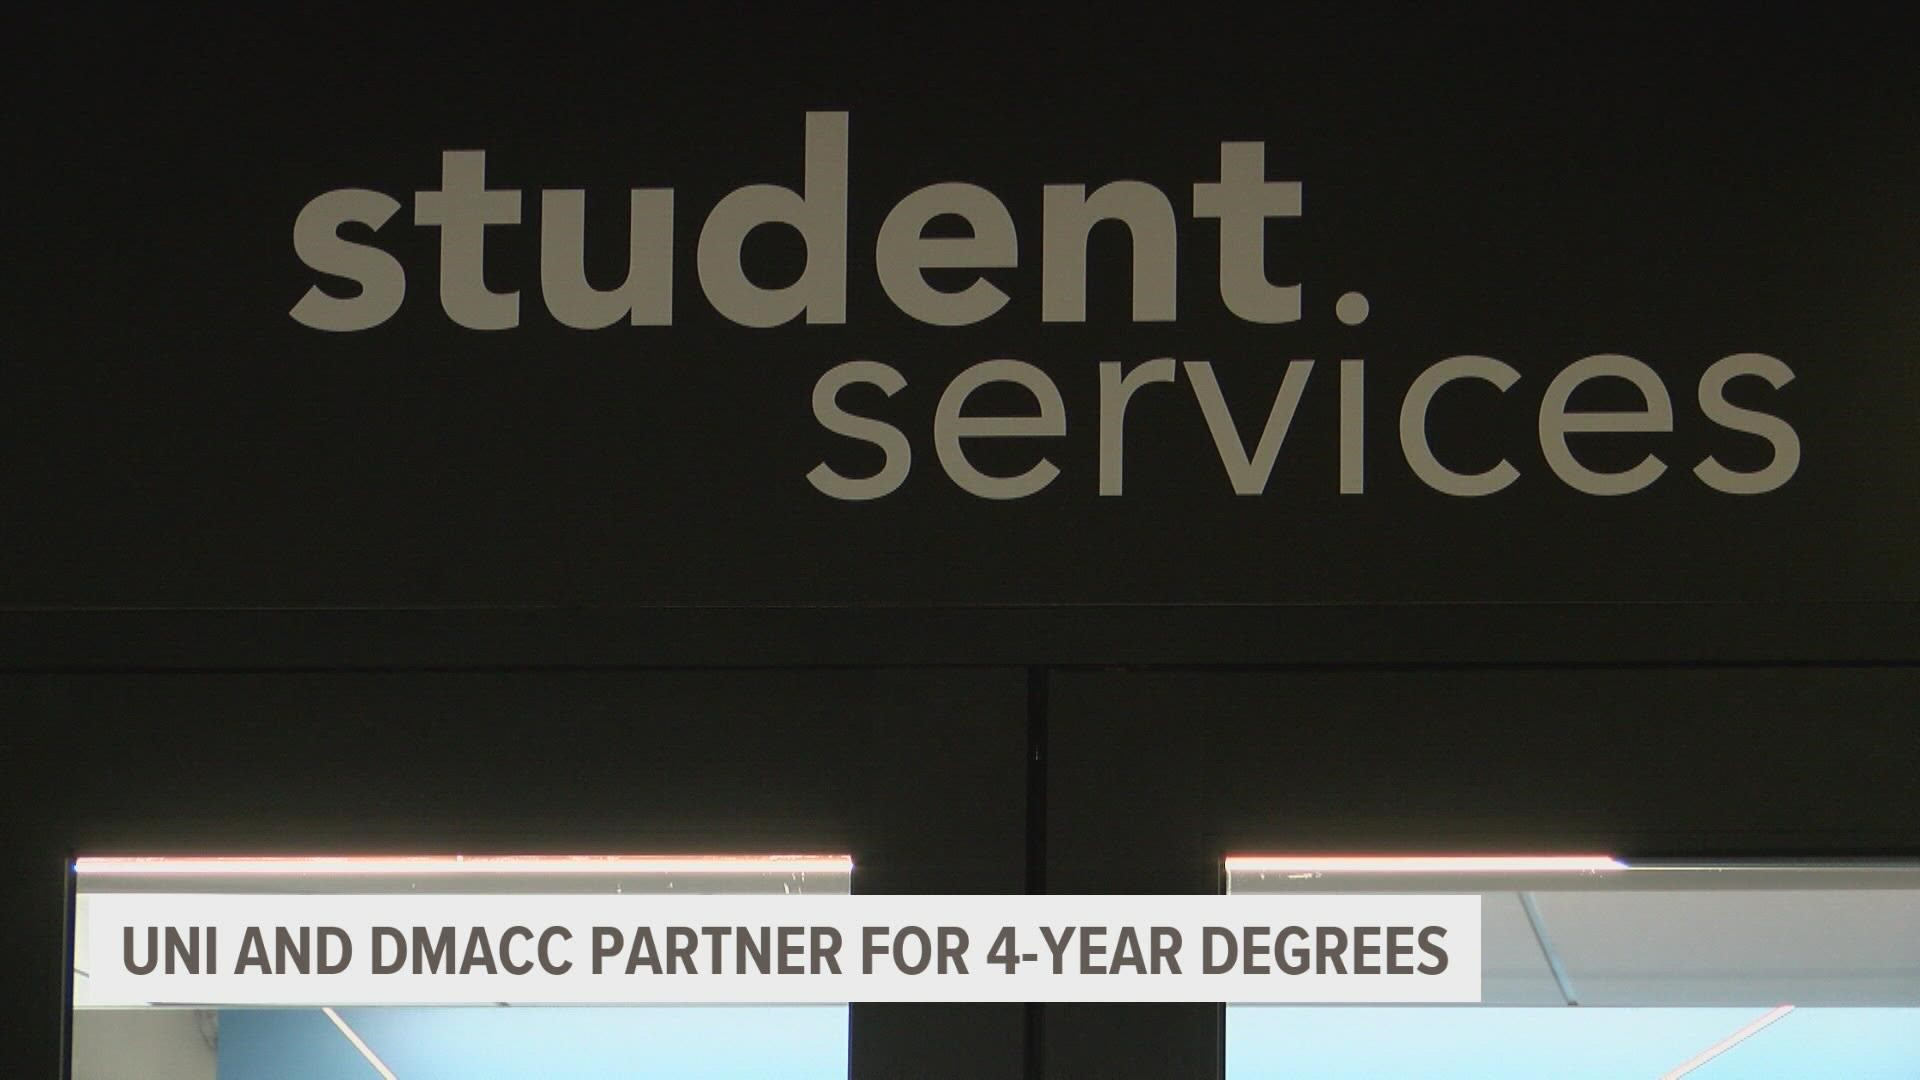 Through scholarships DMACC students may be eligible to earn their four-year degree from UNI while paying DMACC tuition prices